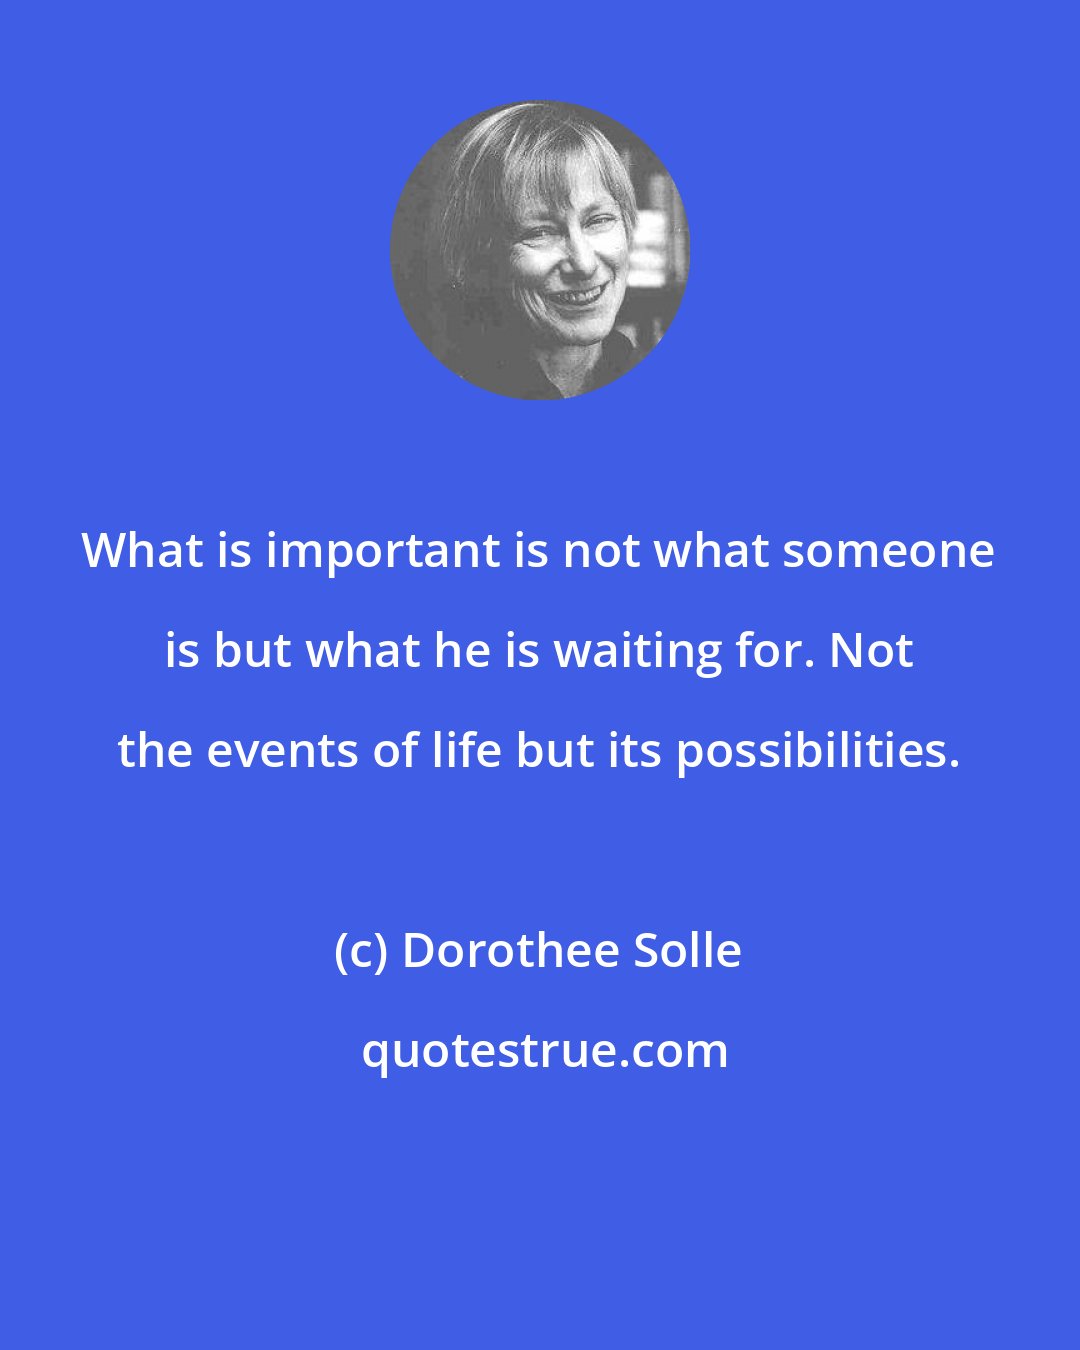 Dorothee Solle: What is important is not what someone is but what he is waiting for. Not the events of life but its possibilities.